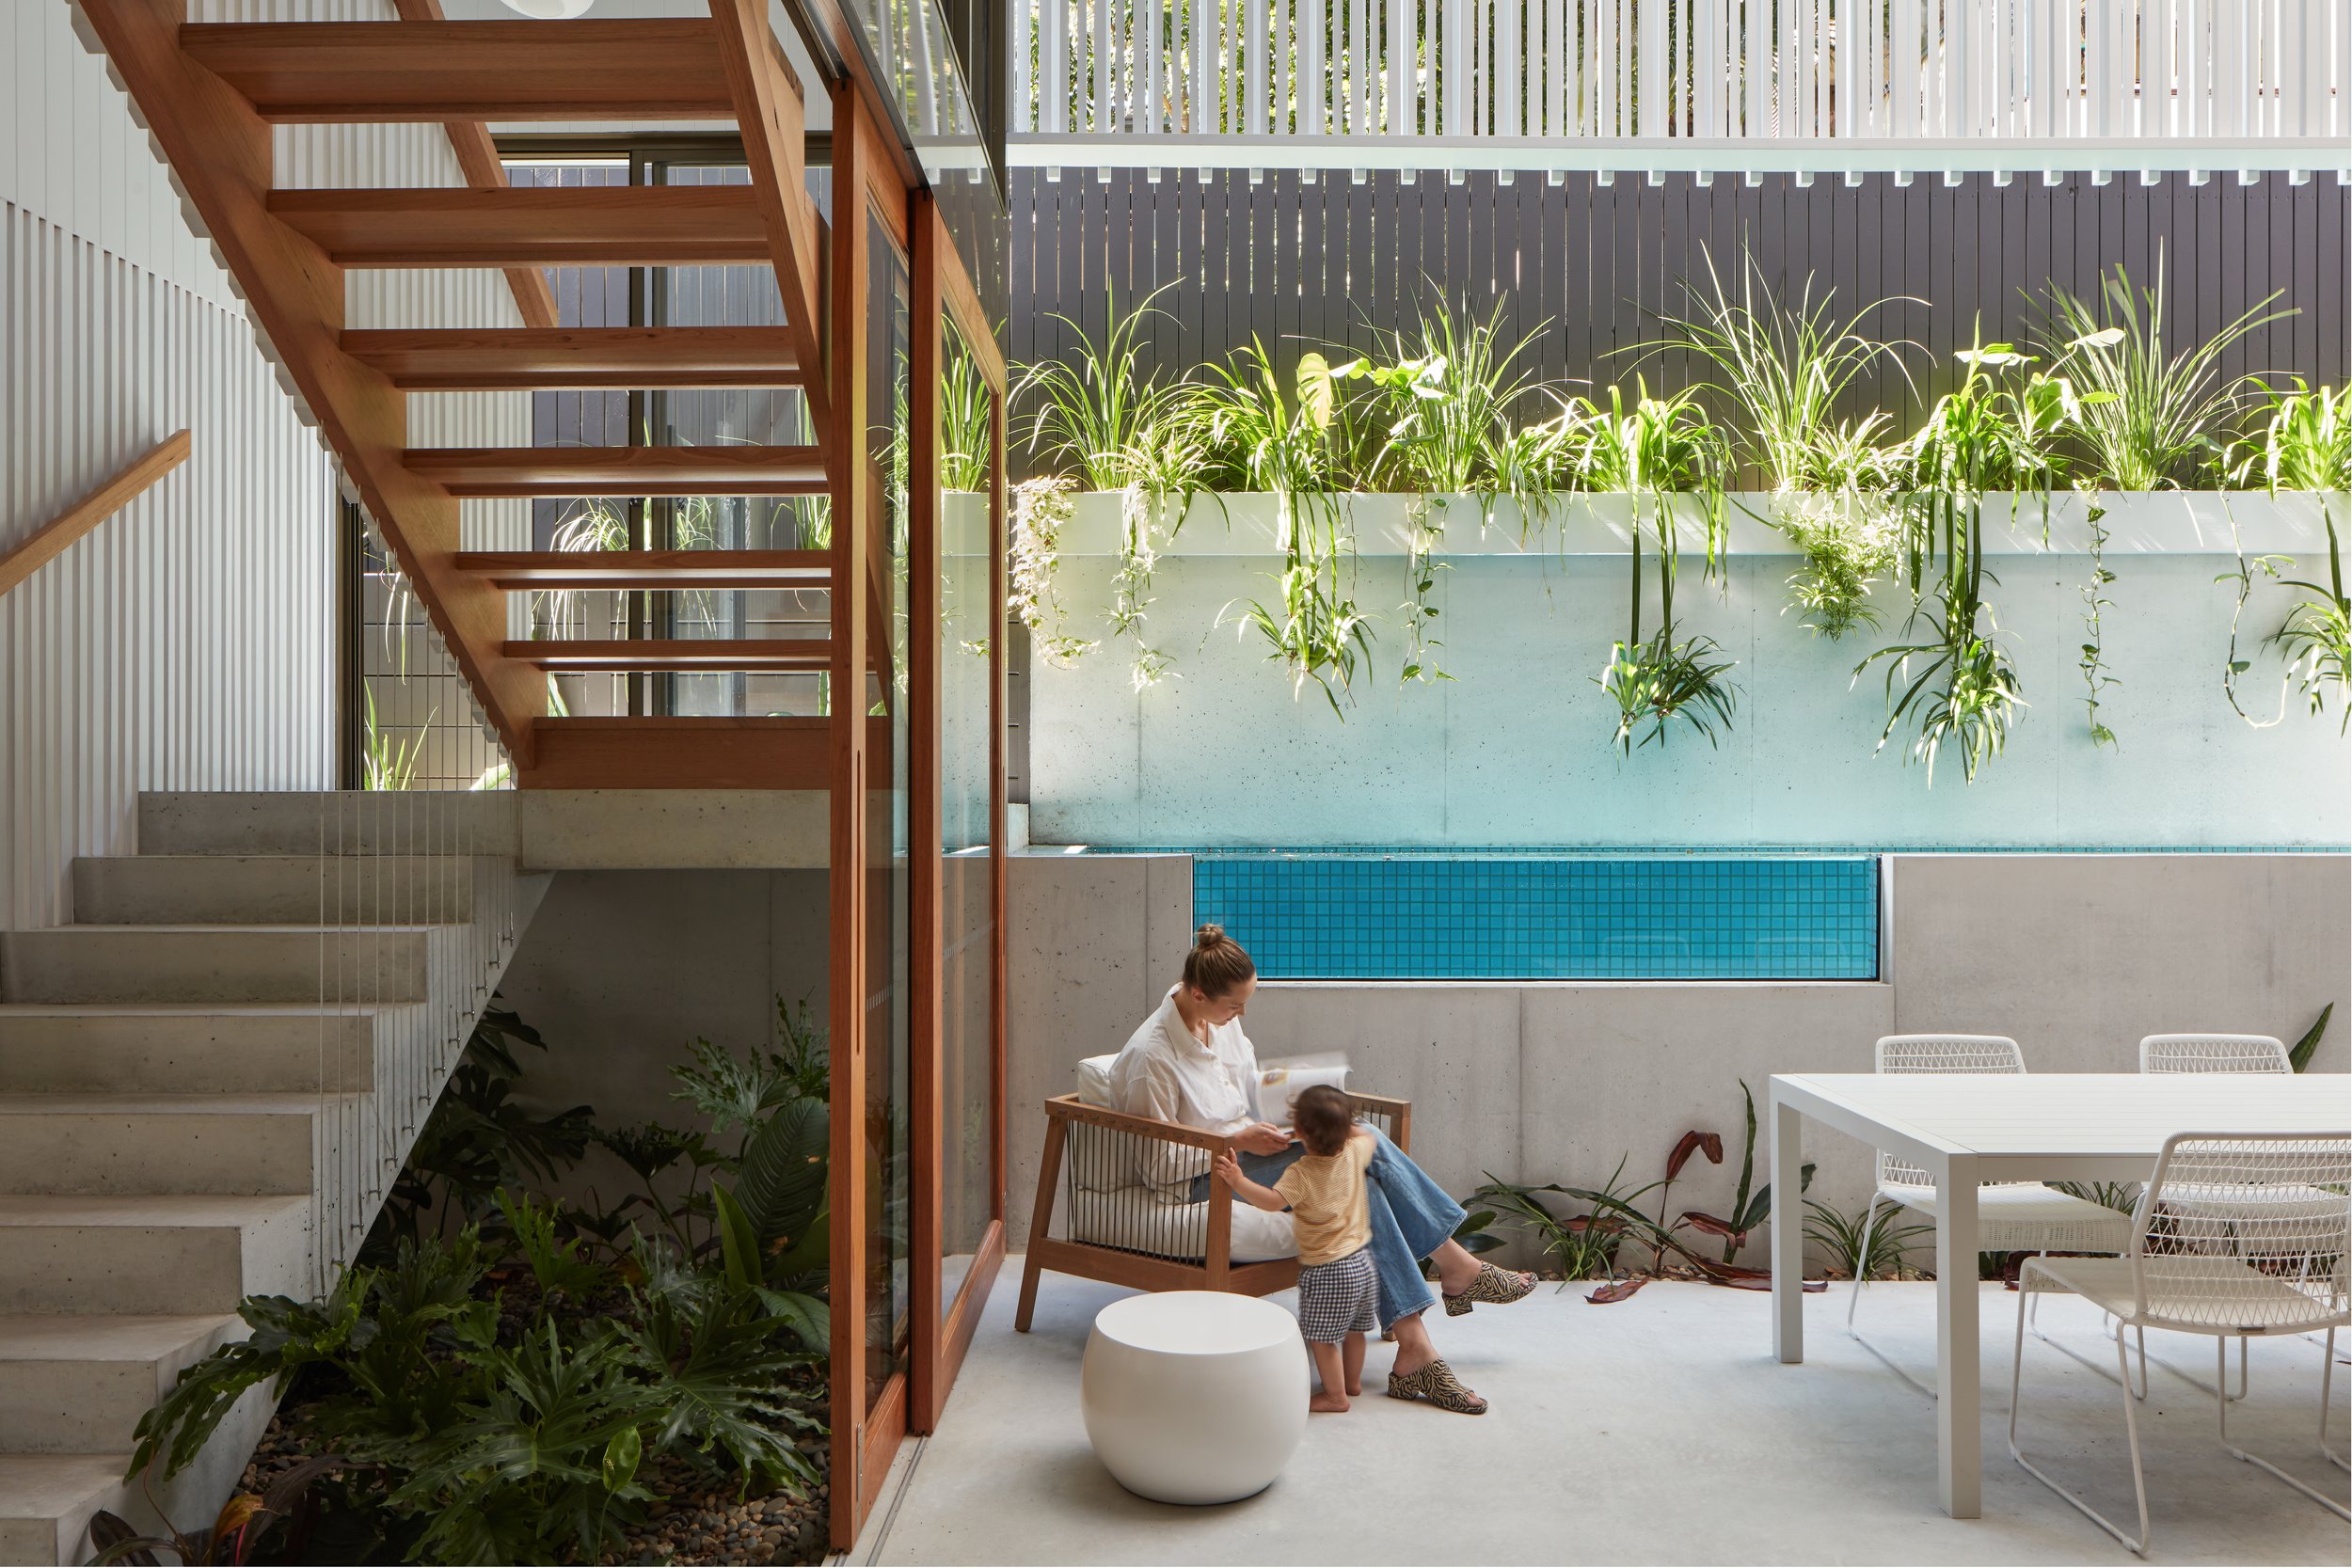 The boundaries between indoor and outdoor spaces blur, with plants complementing the spaces. Following passive sustainability principles, the house will stay cool in summer and warm in winter. 